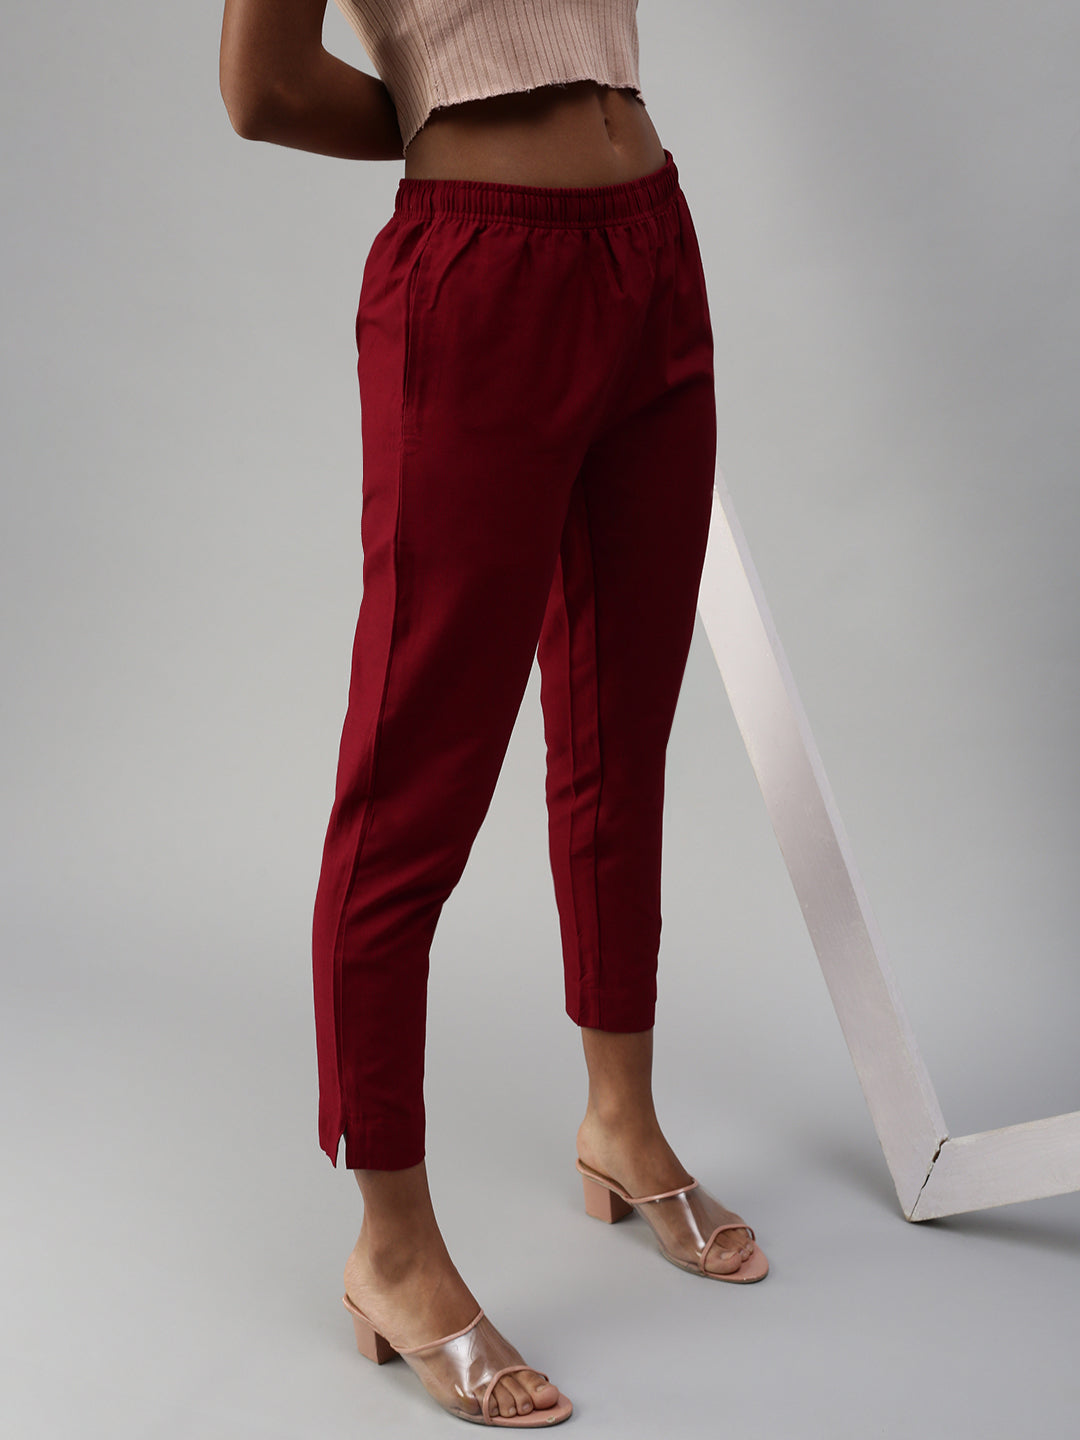 Chic ankle pants with kameez. | Fashion, Indian fashion, Indian designer  outfits